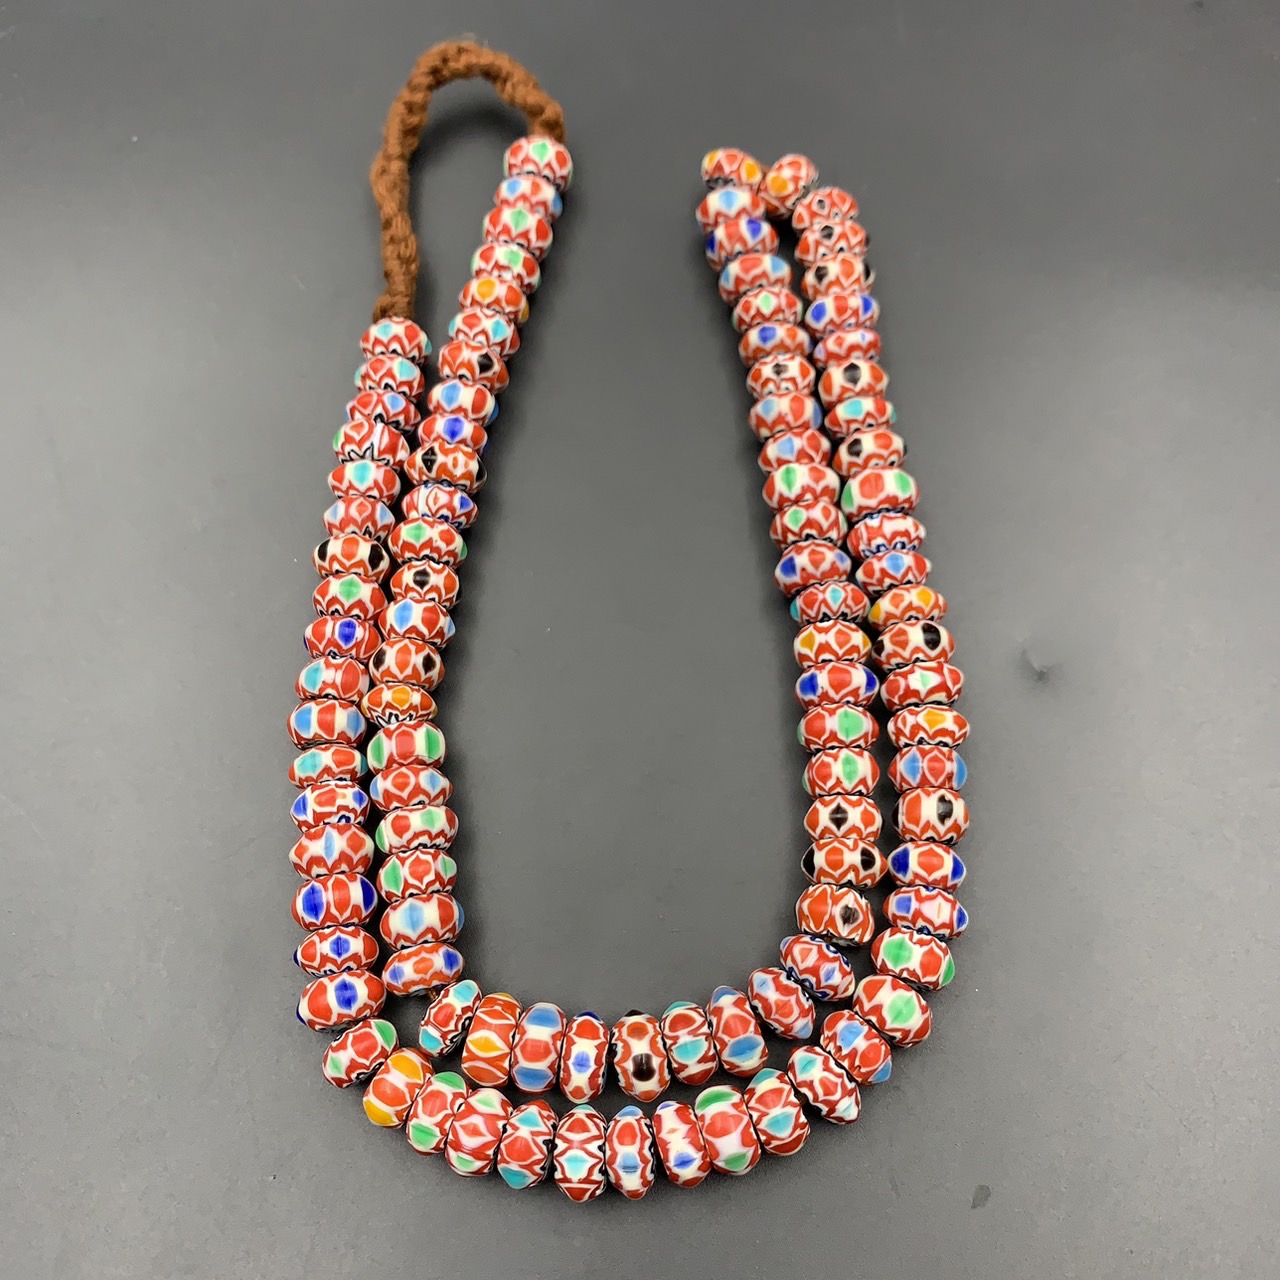 Wonderful Tiny Vintage Chevron Trade African Glass Beads Strand, LPBR-0311 - Image 2 of 11